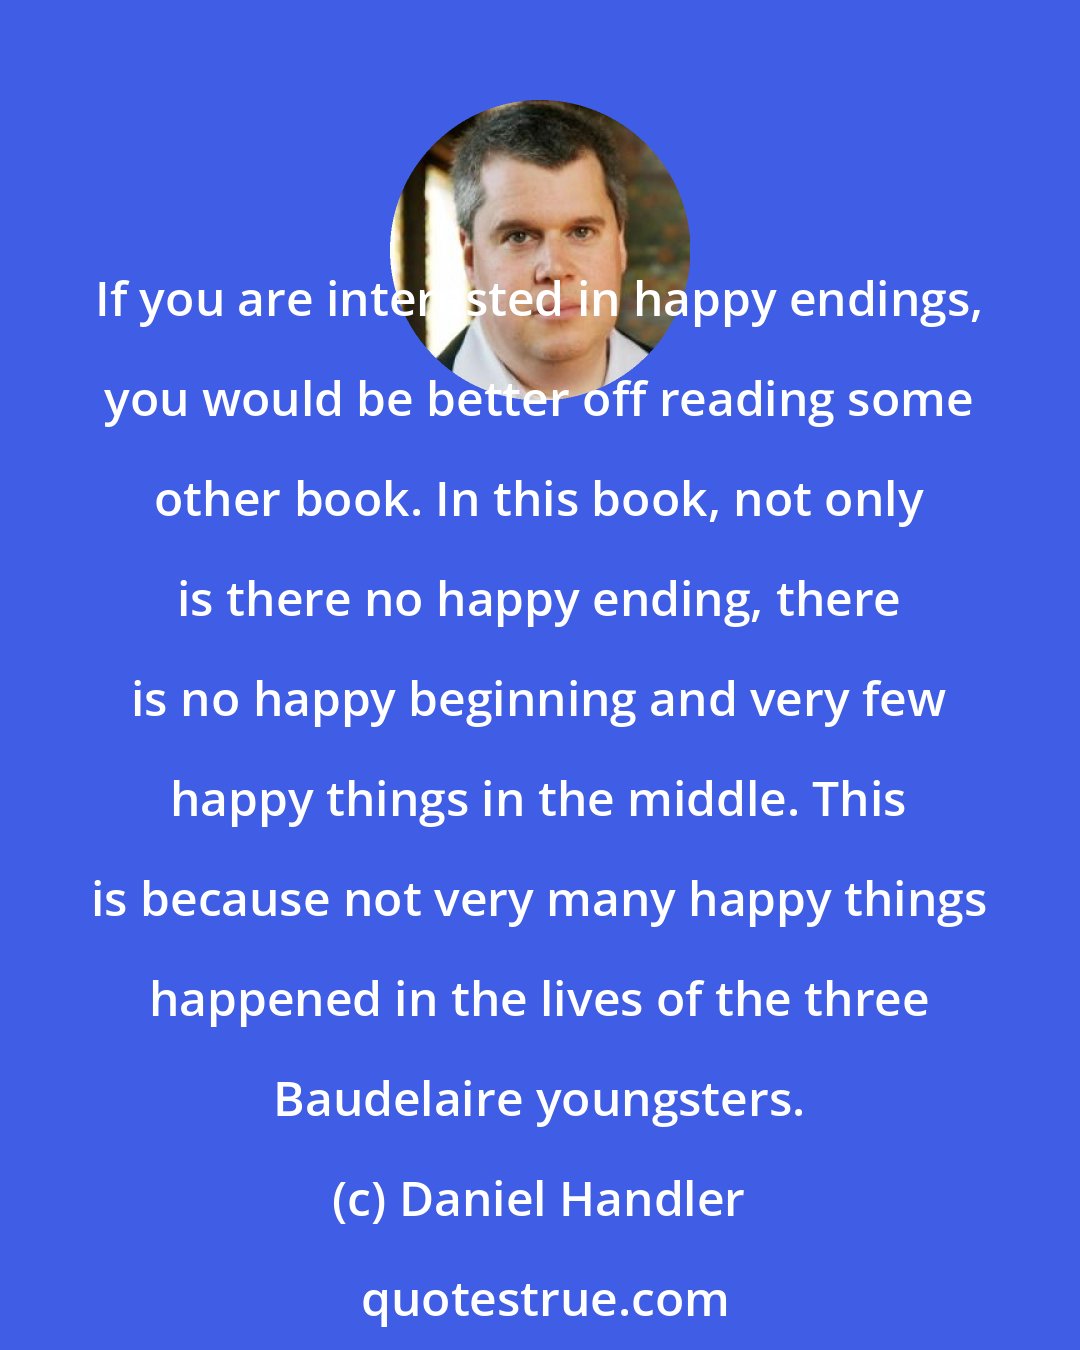 Daniel Handler: If you are interested in happy endings, you would be better off reading some other book. In this book, not only is there no happy ending, there is no happy beginning and very few happy things in the middle. This is because not very many happy things happened in the lives of the three Baudelaire youngsters.